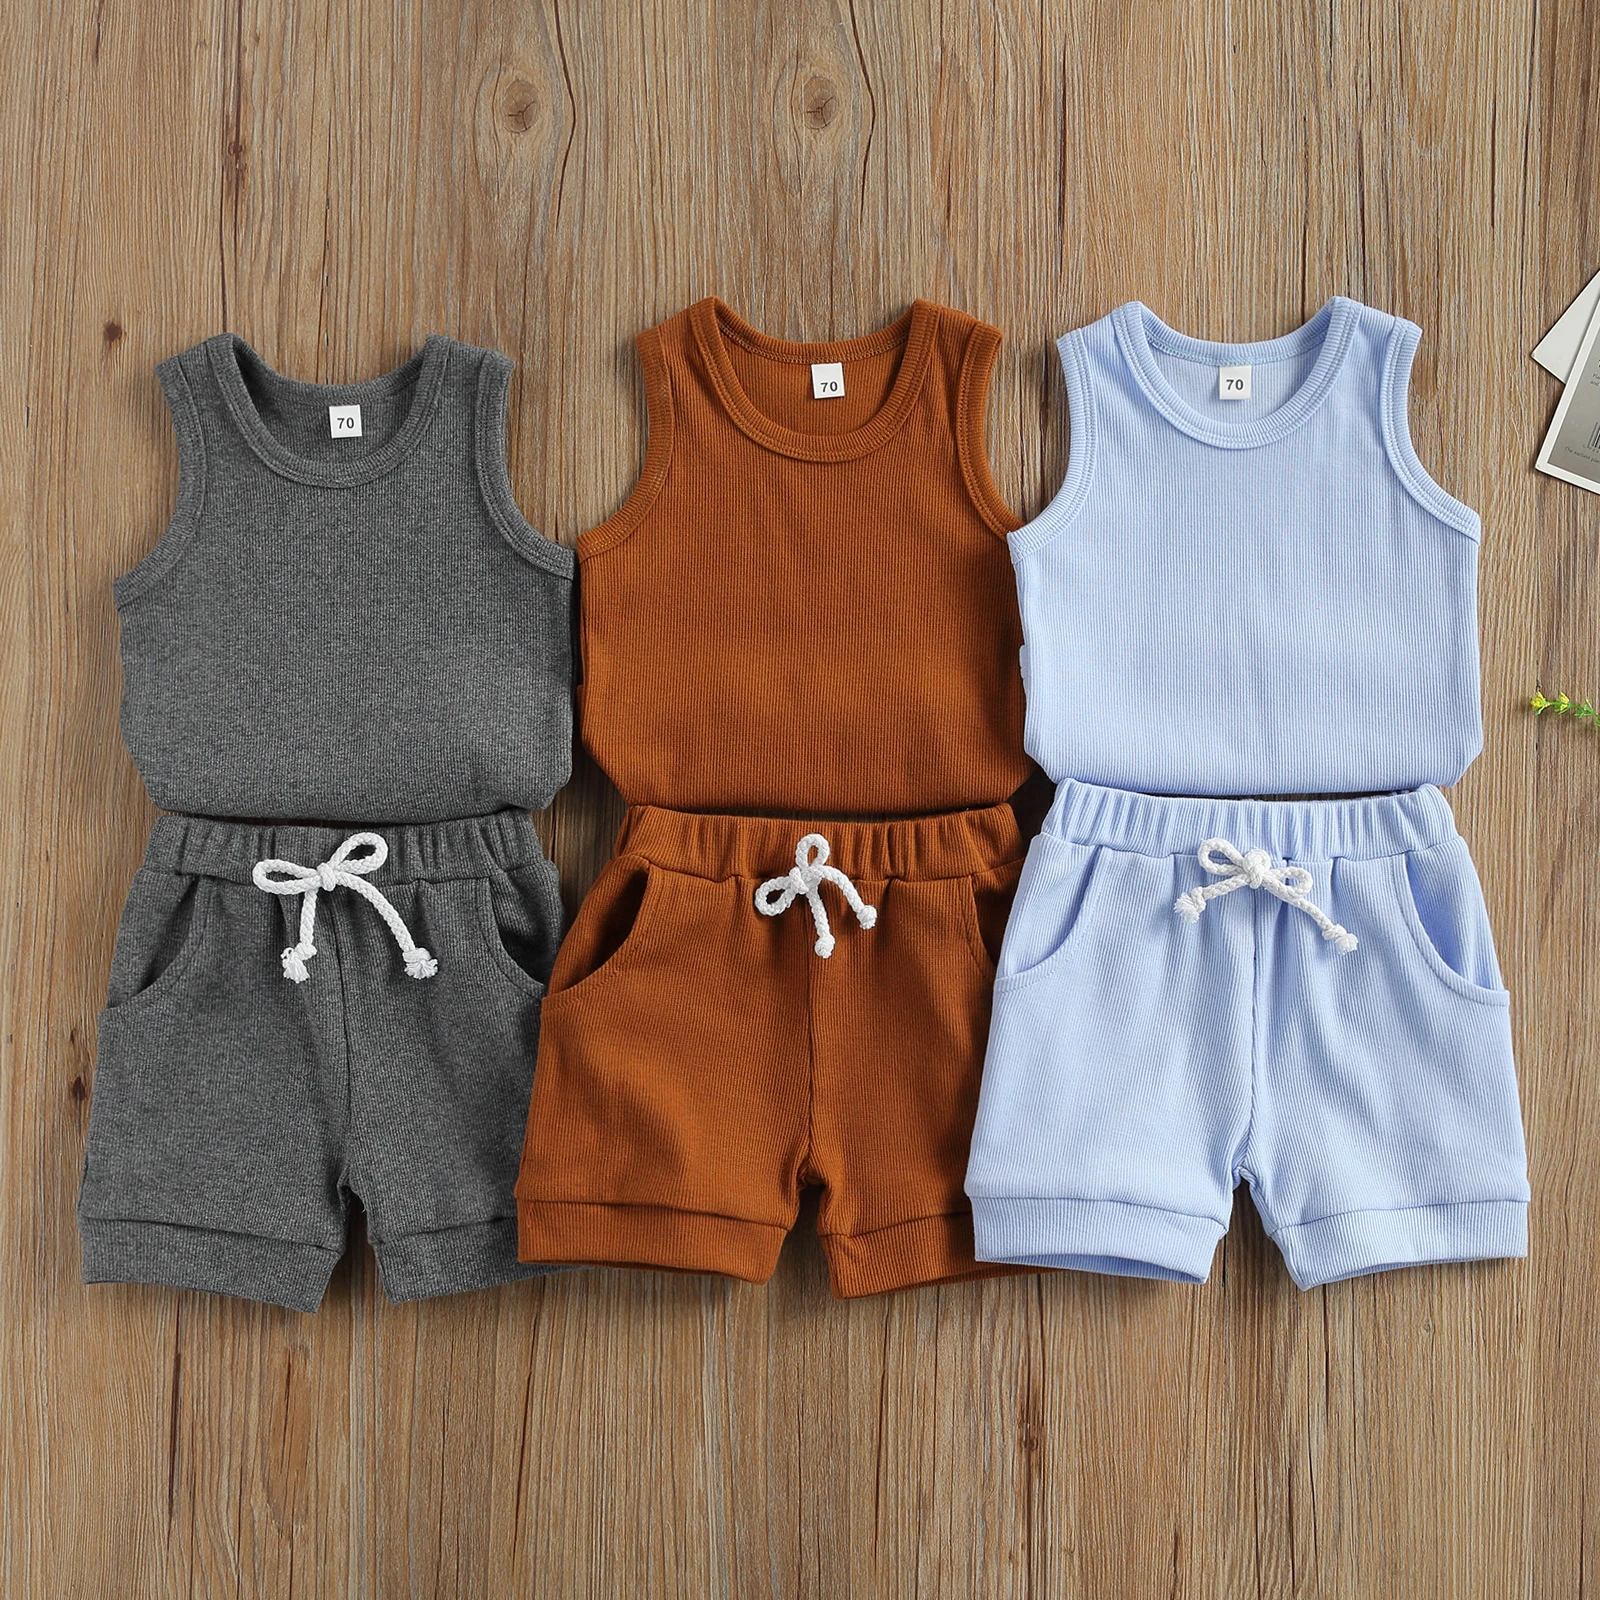 Fashion Summer Newborn Baby 2-piece Outfit Set Sleeveless Solid Color Tops+Shorts Casual Set for Kids Baby Boys Girls